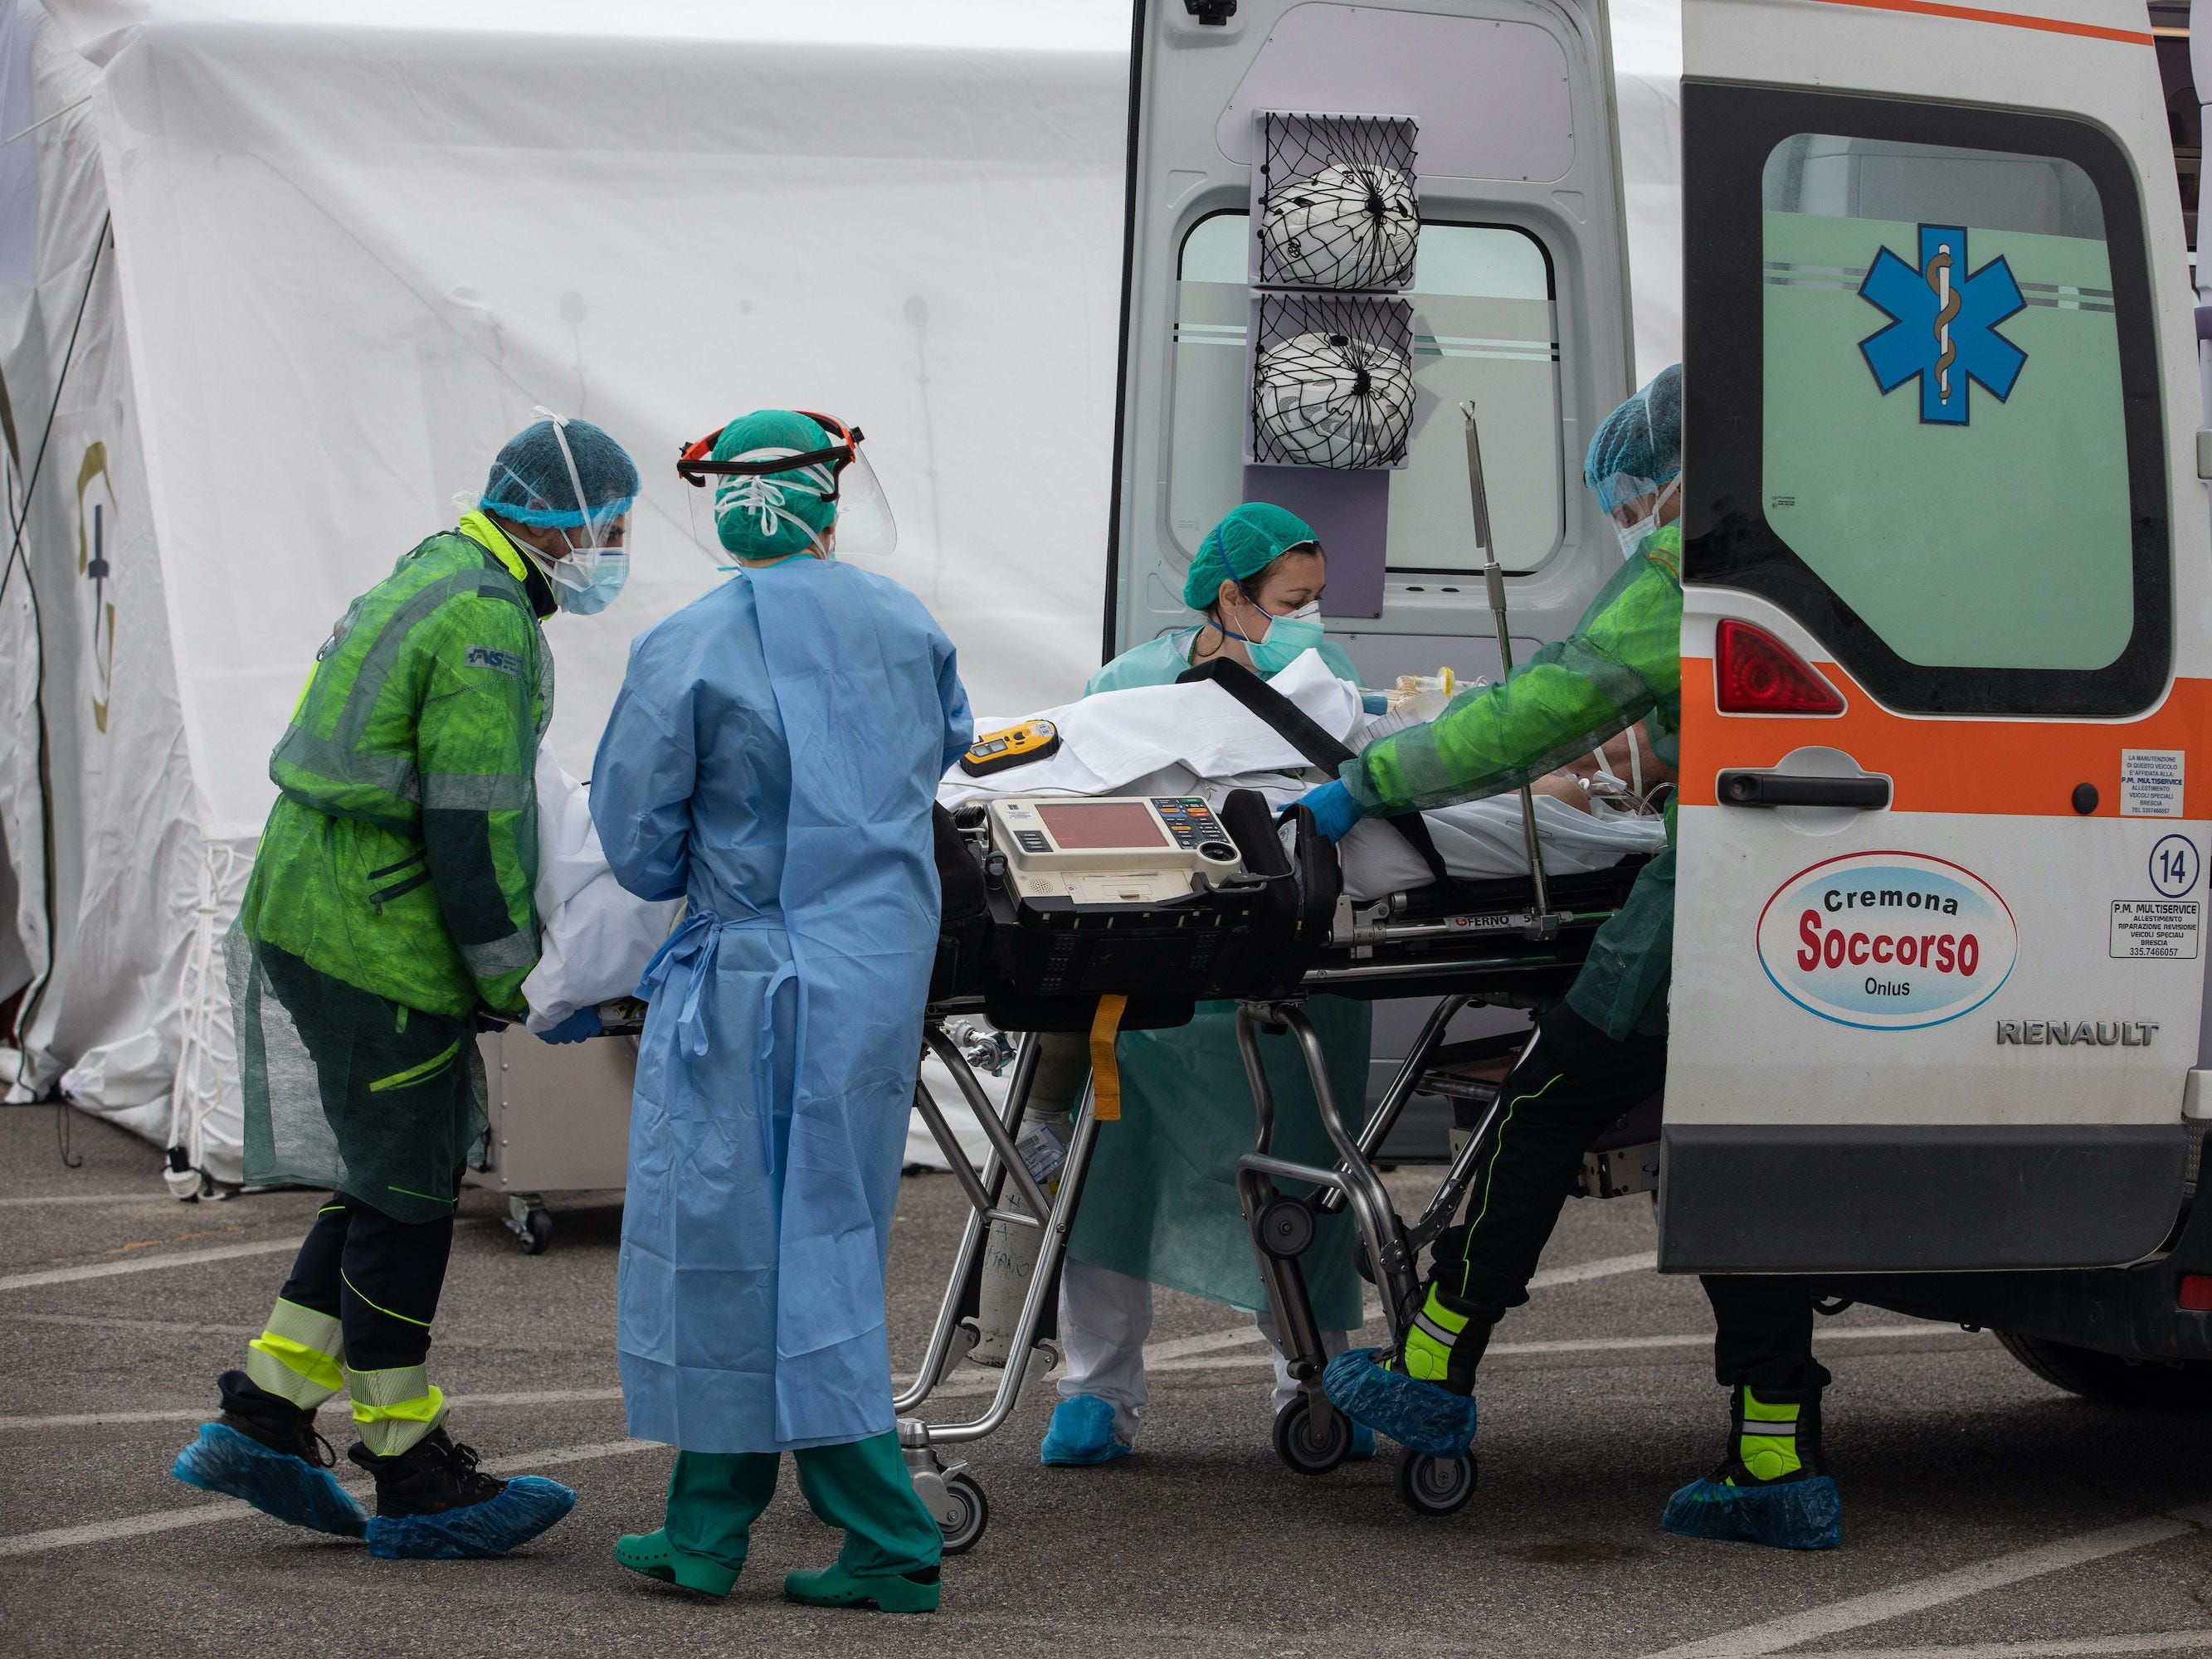 Transport of a COVID-19 patient, Cremona, Italy. (Emanuele Cremaschi/Getty Images)